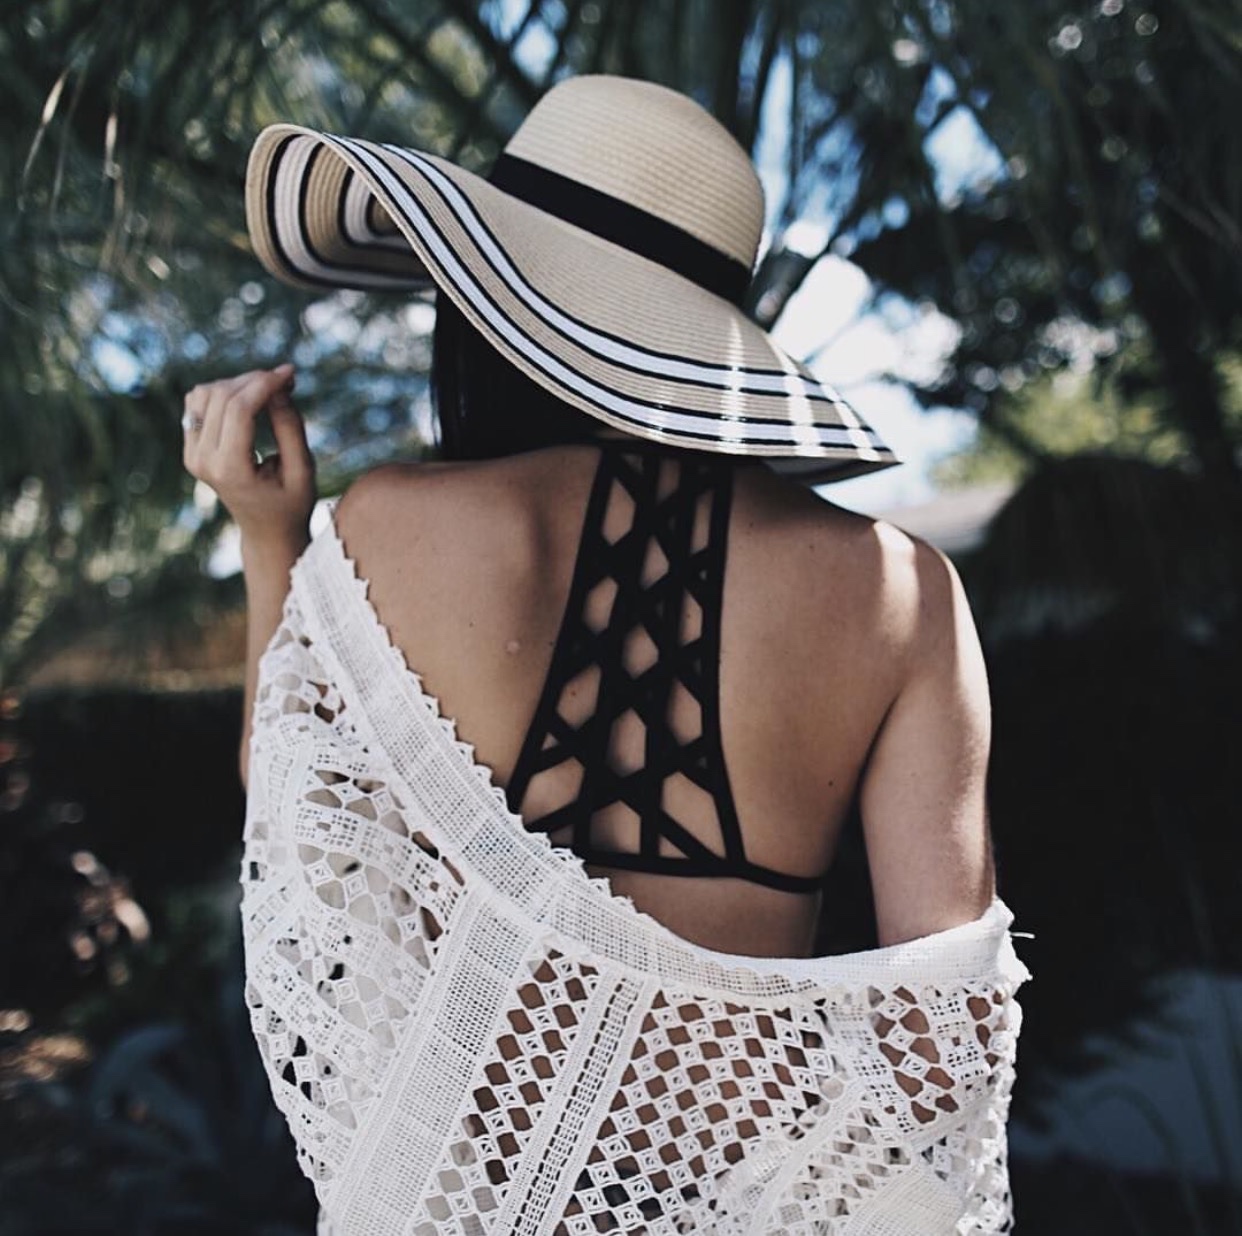 DTKAustin shares her favorite looks from her April Instagram posts over on the blog. The best of summer outfits all in one place! Click for more information and photos.